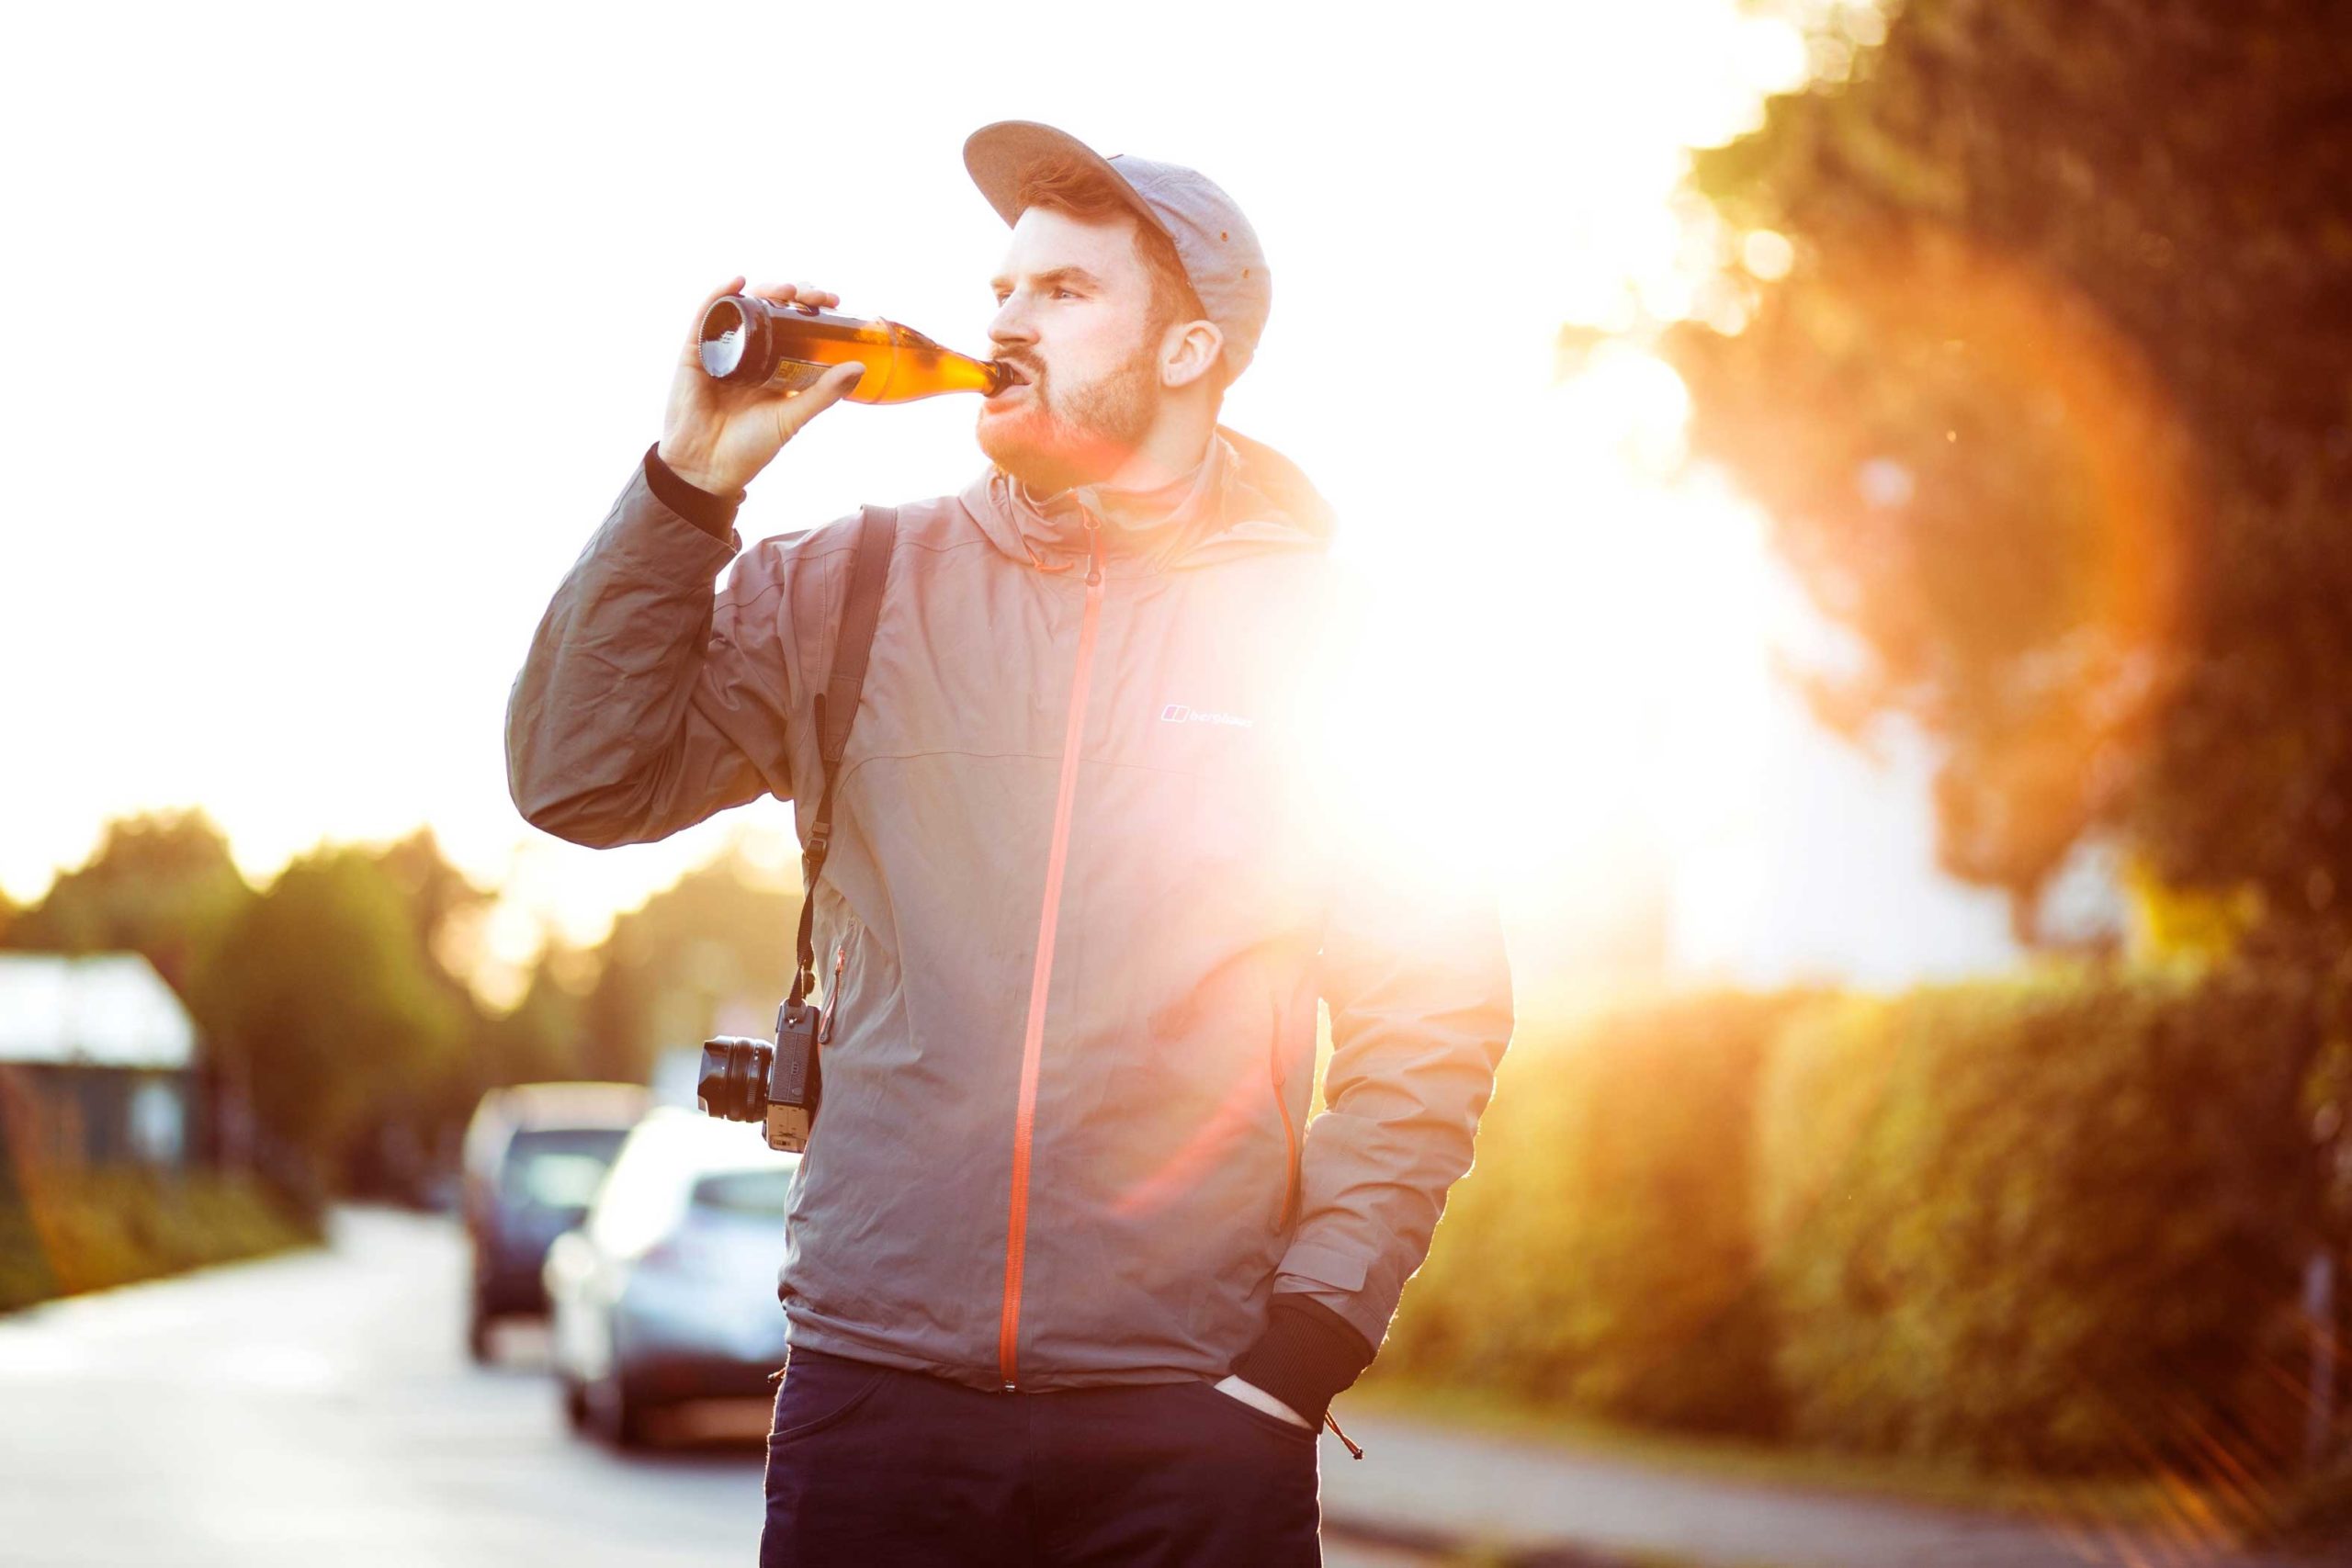 Guy drinking beer in the sunset